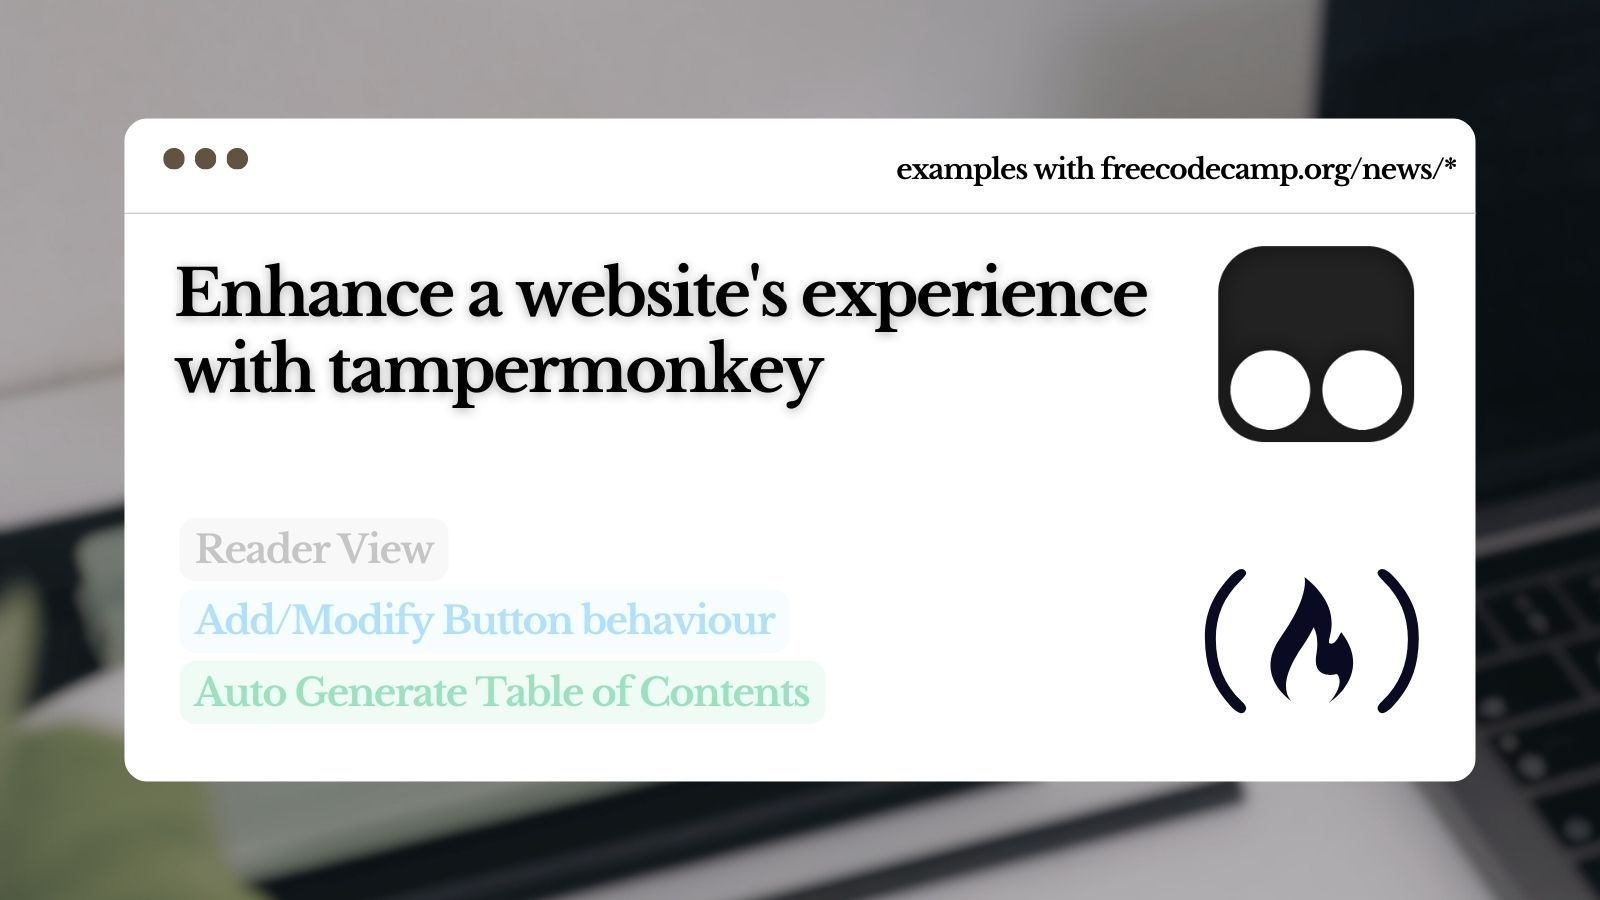 How to Use Tampermonkey to Improve a Website's UI – Example Using freeCodeCamp